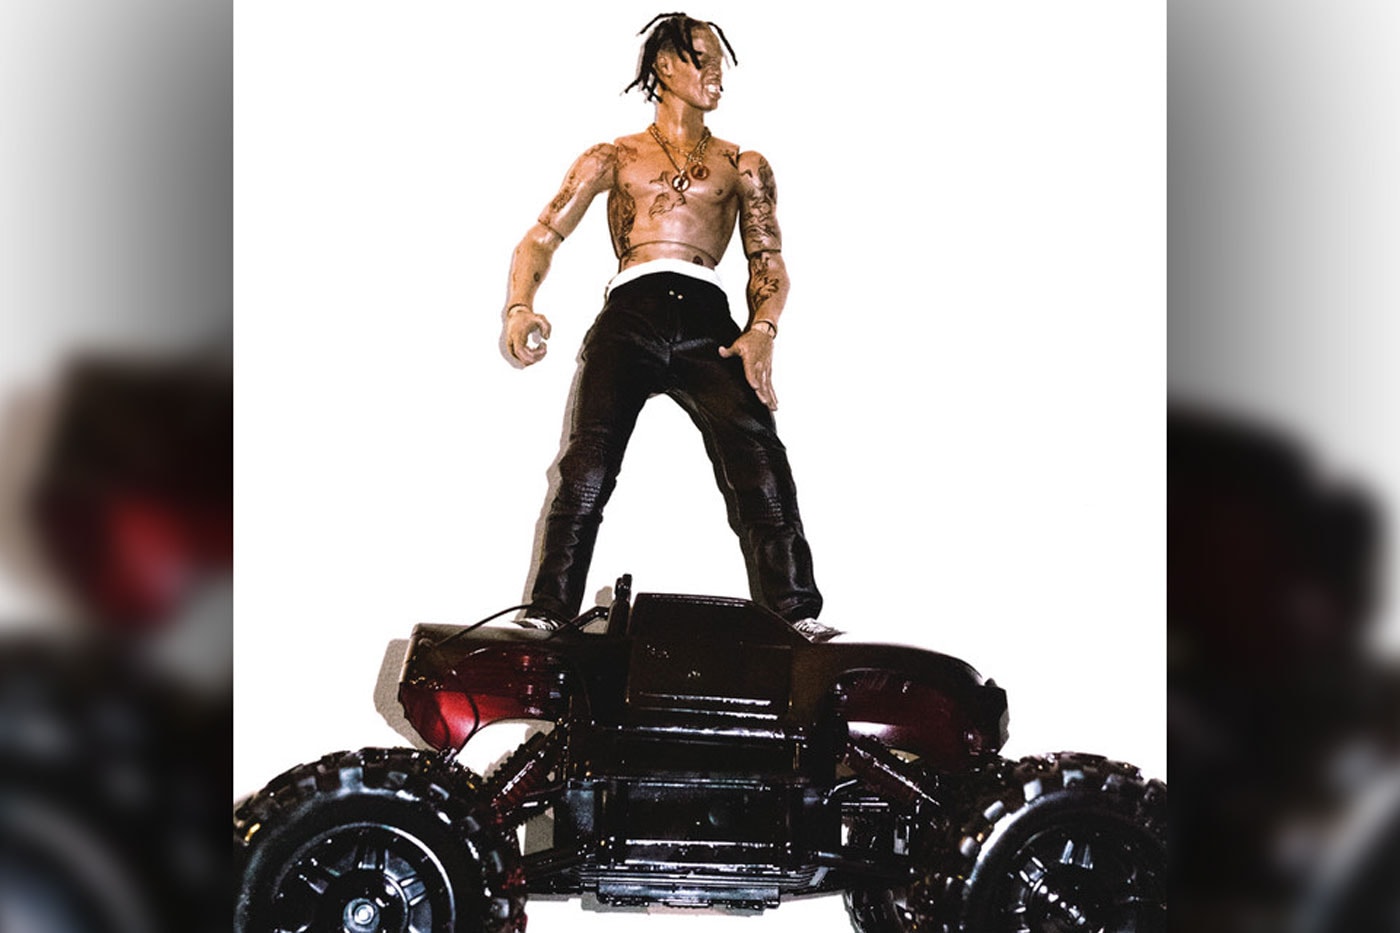 Travi$ Scott & Kanye West's "Piss On Your Grave" Video is Here